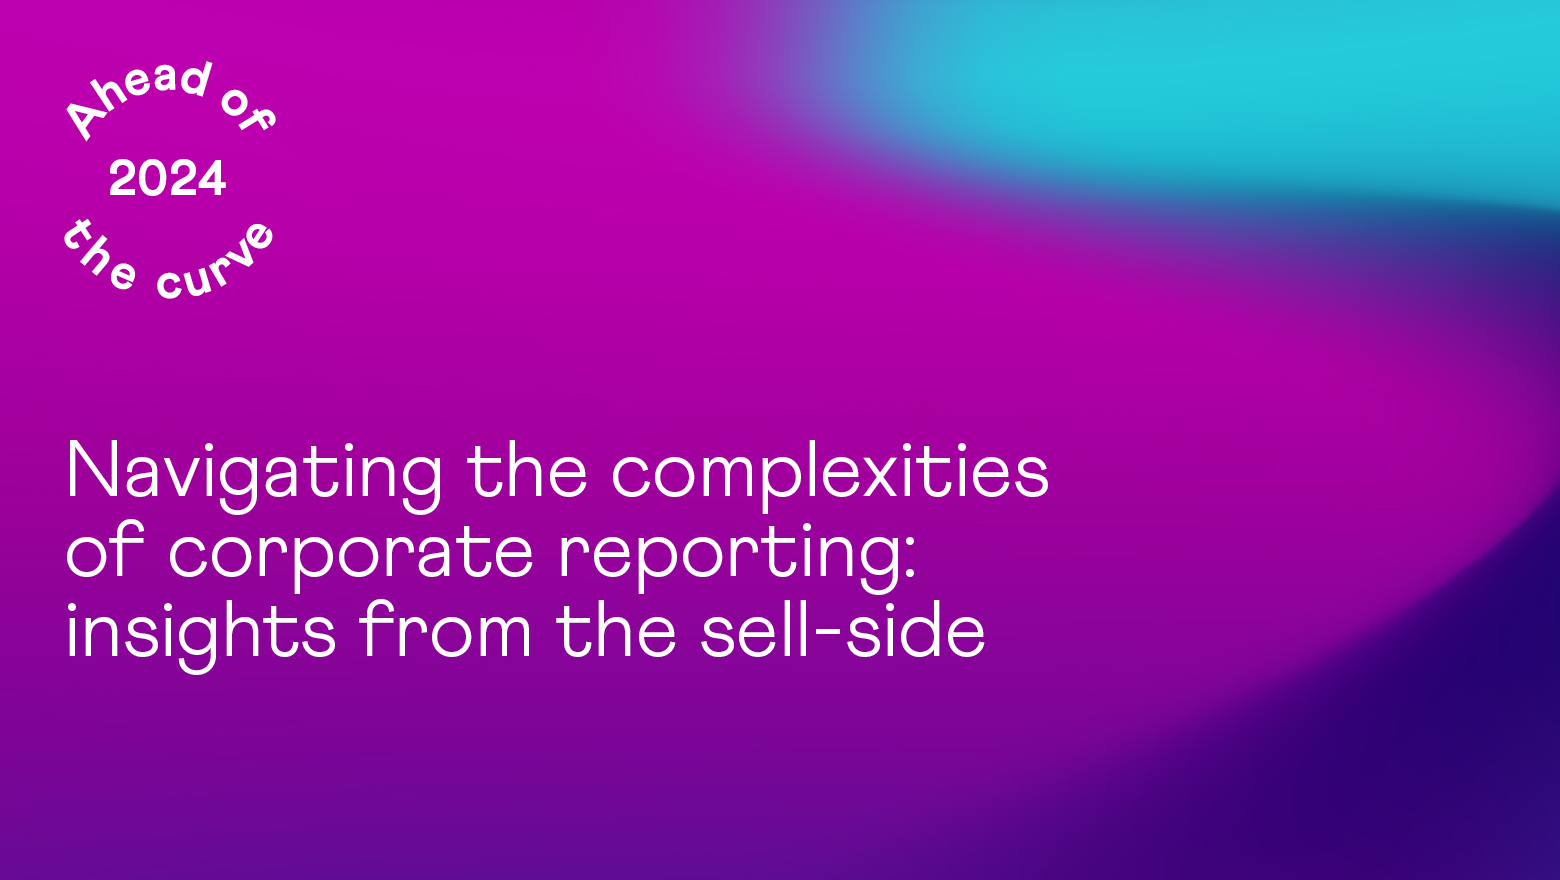 Navigating the complexities of corporate reporting: insights from the sell-side